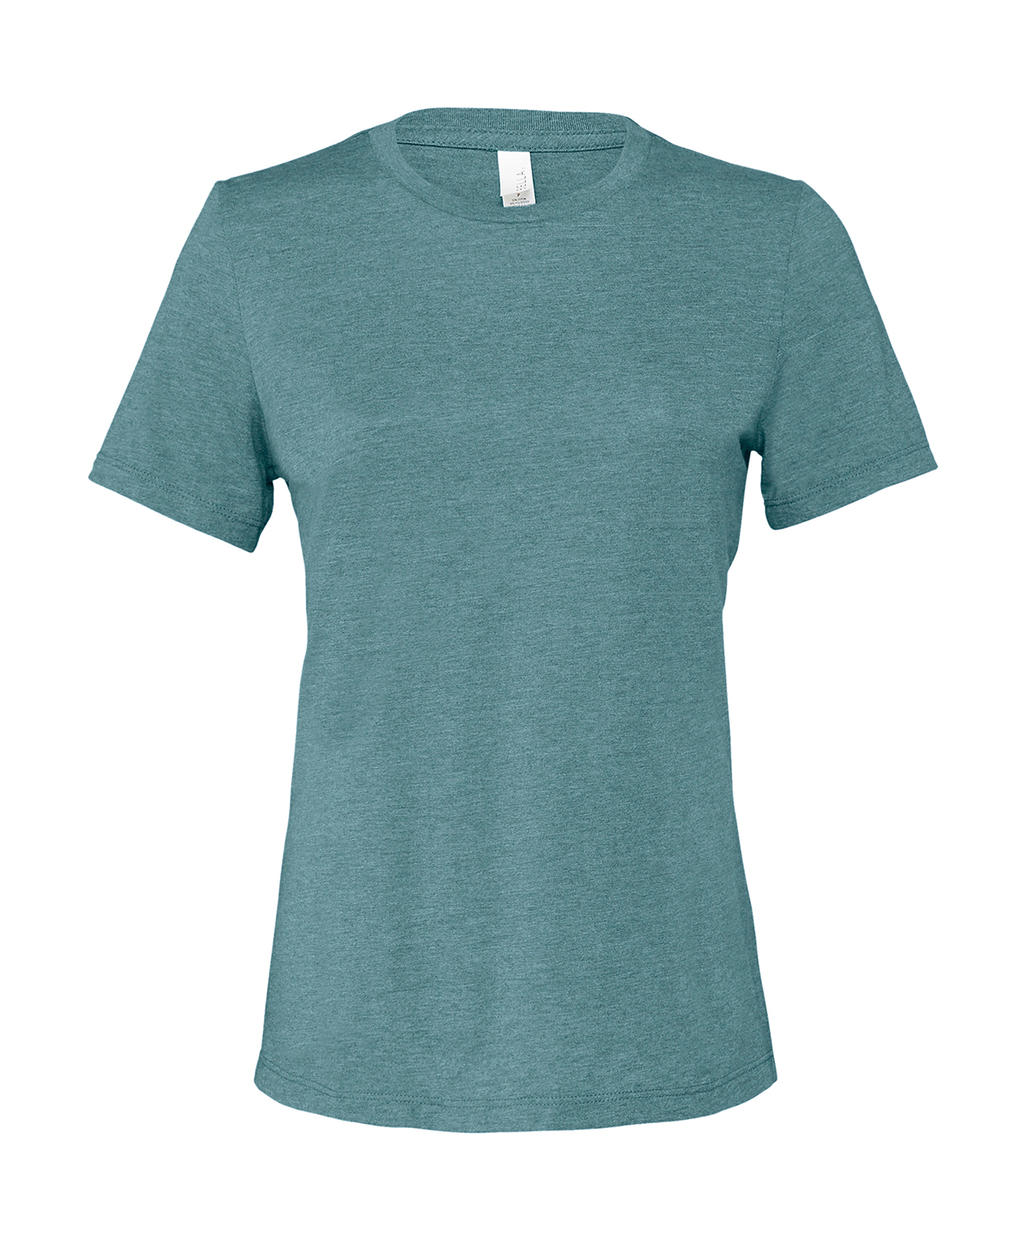  Womens Relaxed Jersey Short Sleeve Tee in Farbe Heather Deep Teal